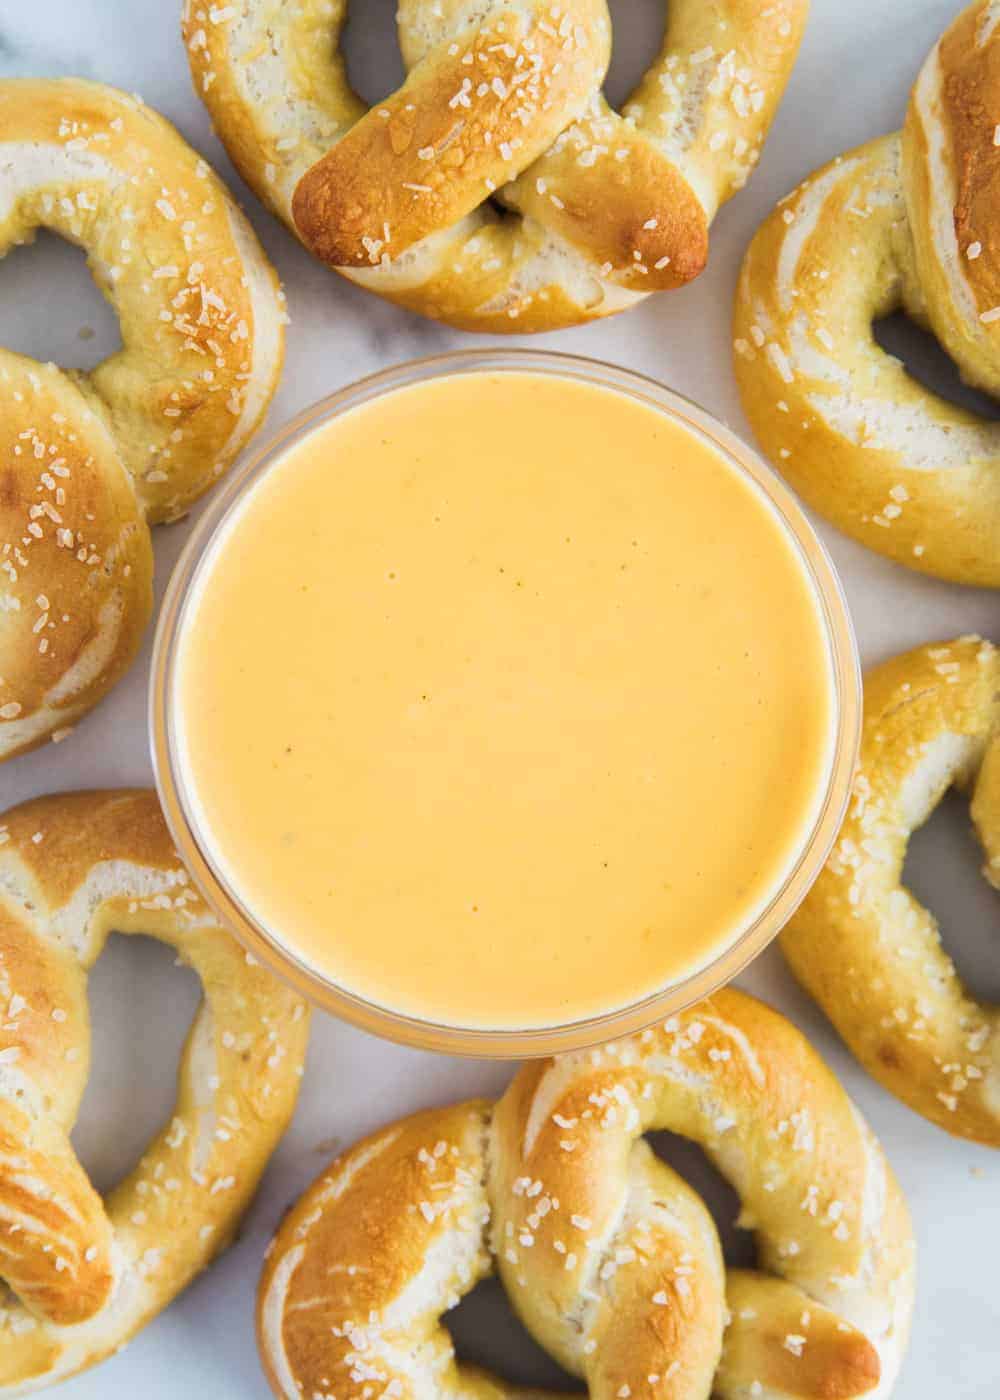 cheese dip for pretzels in glass bowl